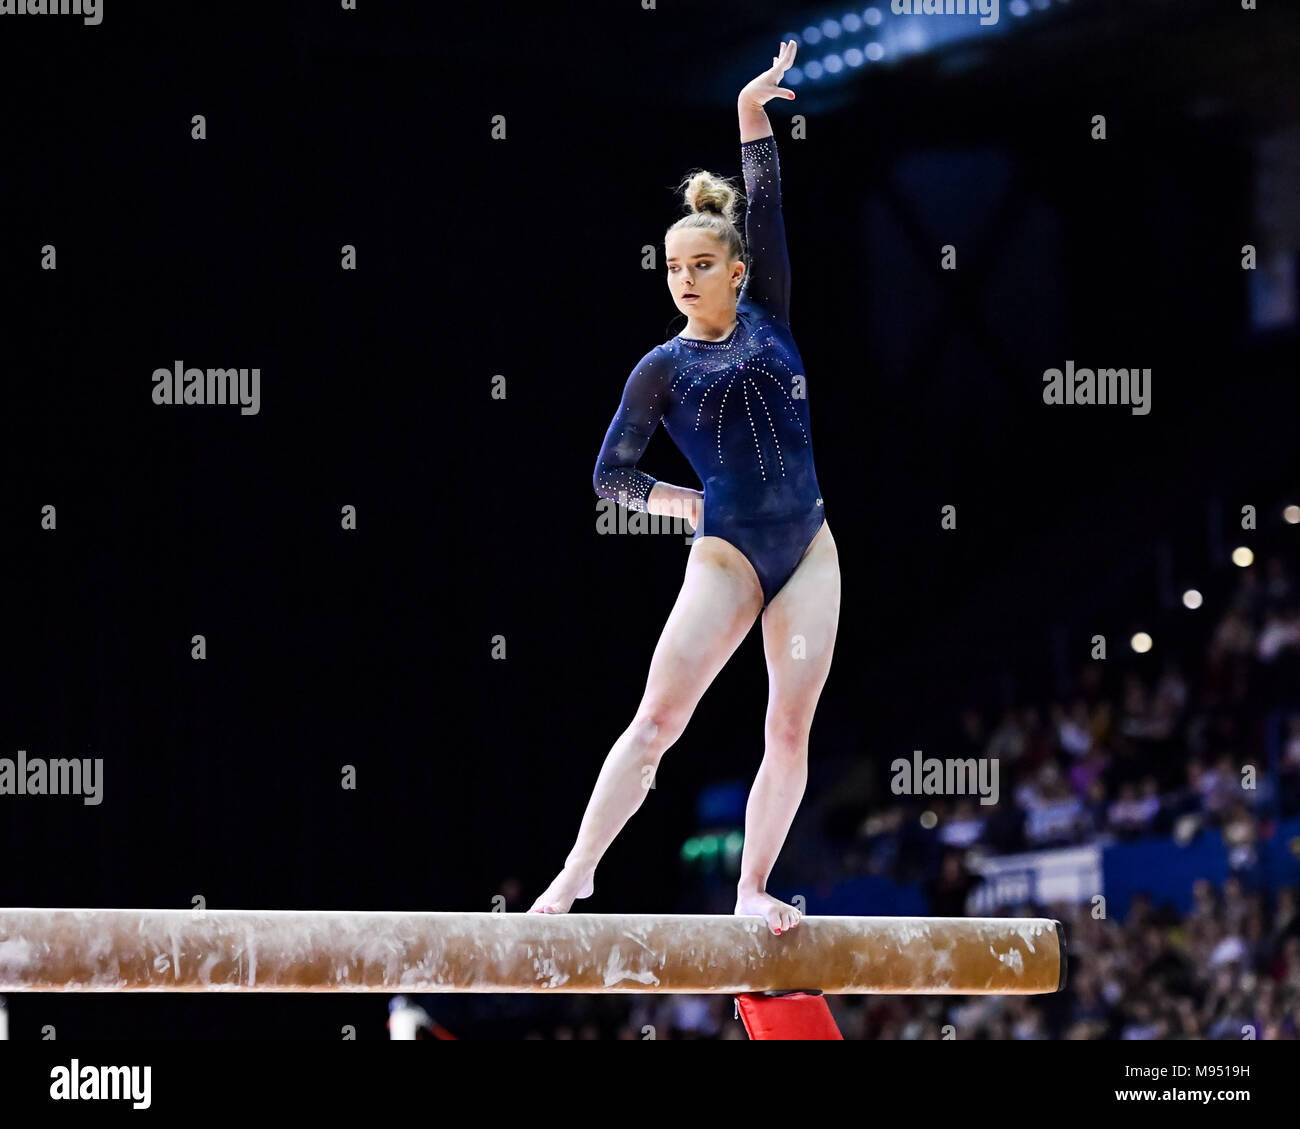 Birmingham, UK. 22nd march, 2018. Alice Kinsella (GBR) competes on the Balance Beam during the 2018 FIG Gymnastics World Cup at Arena Birmingham on Thursday, 22 March 2018. Birmingham England. Credit: Taka G Wu Credit: Taka Wu/Alamy Live News Stock Photo